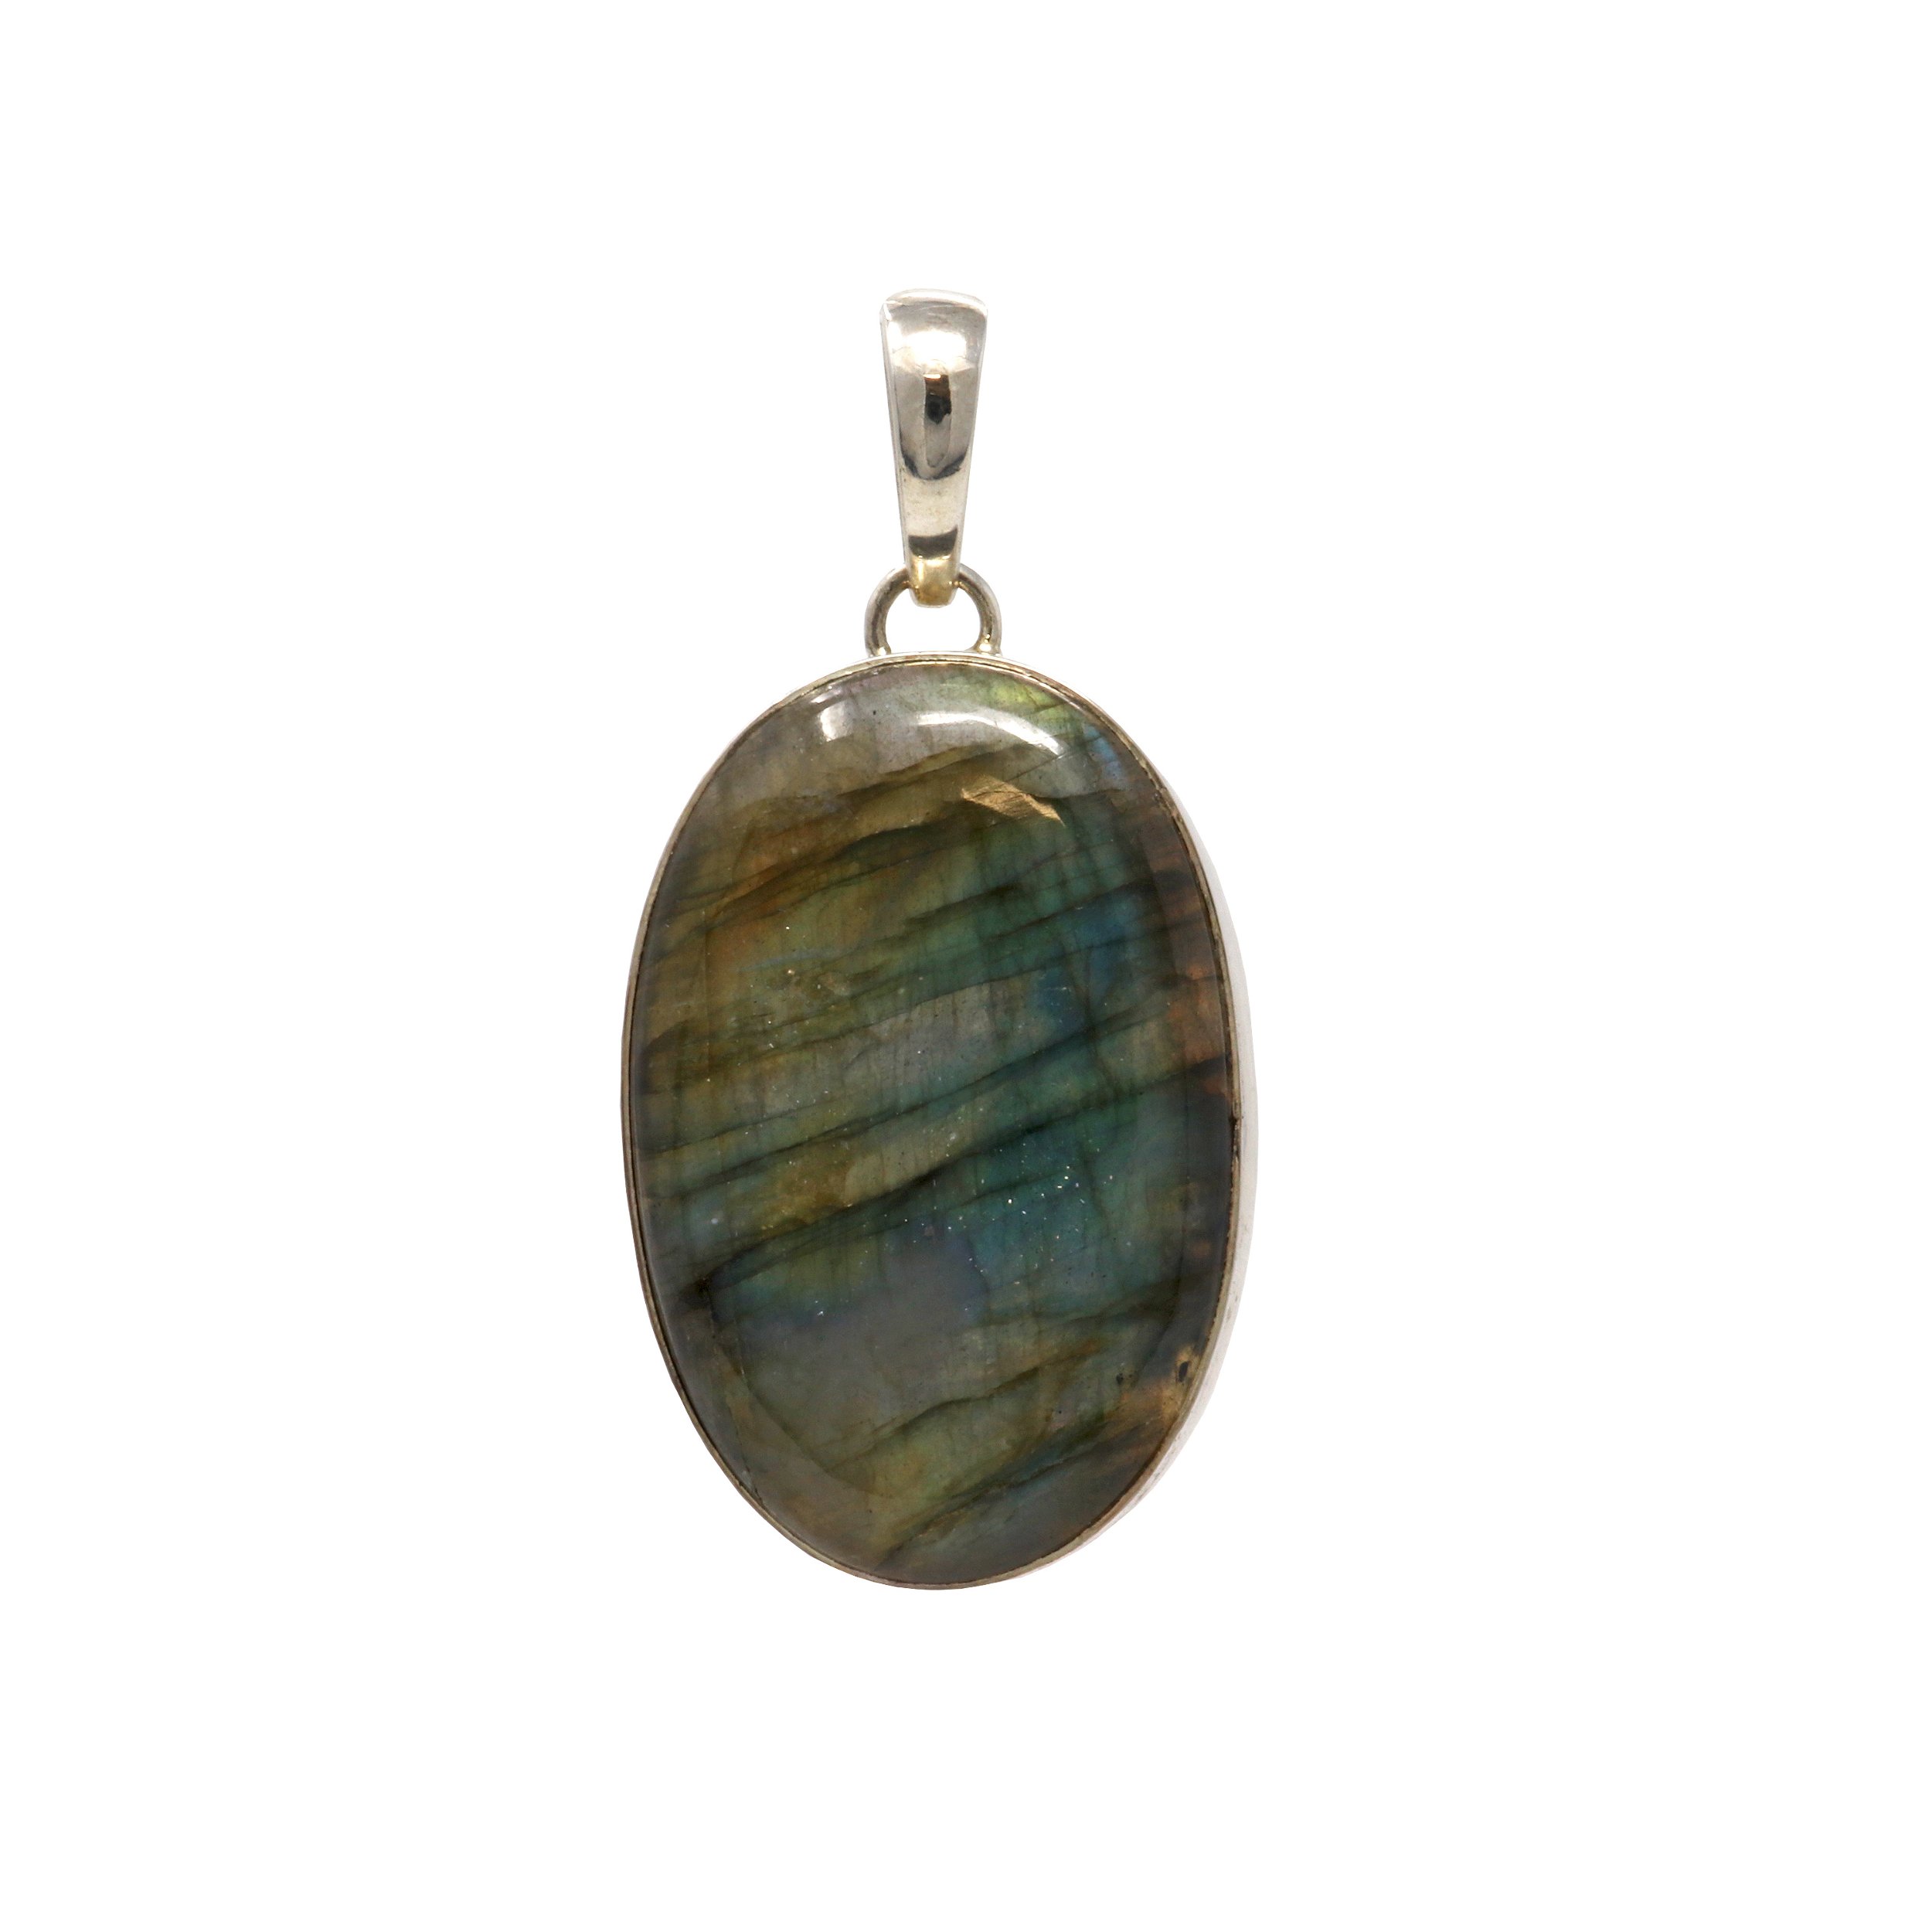 Labradorite Pendant -Oval Cabochon With Yellow & Teal Shift With Light Gray Cloudy Inclusion